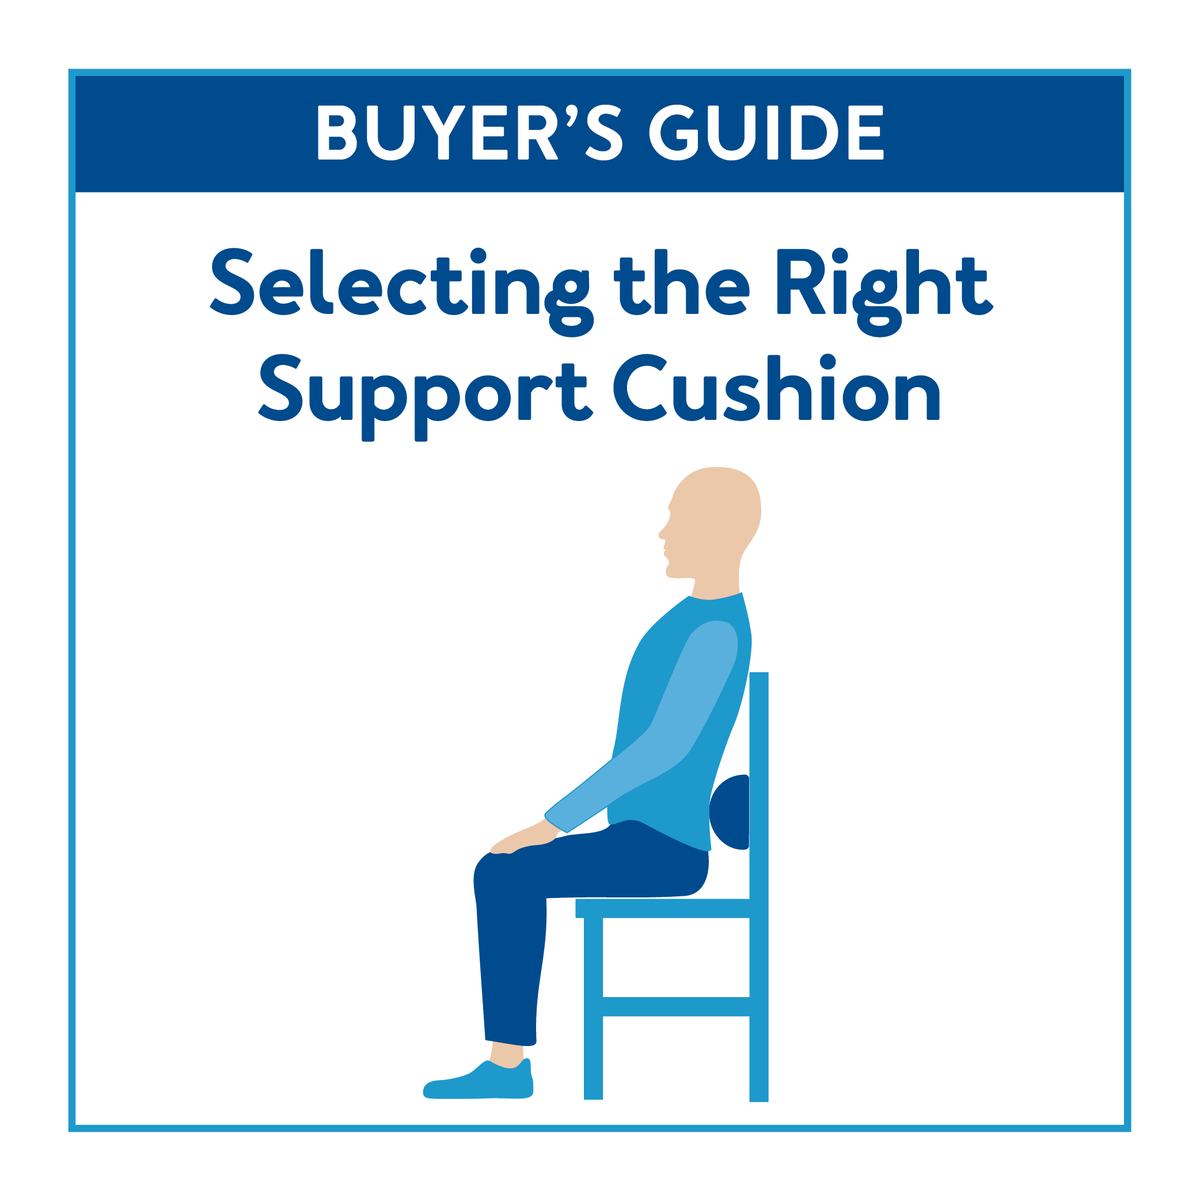 A graphic of a man sitting on a chair using a support cushion. Text, “Buyer’s Guide: Selecting the Right Support Cushion